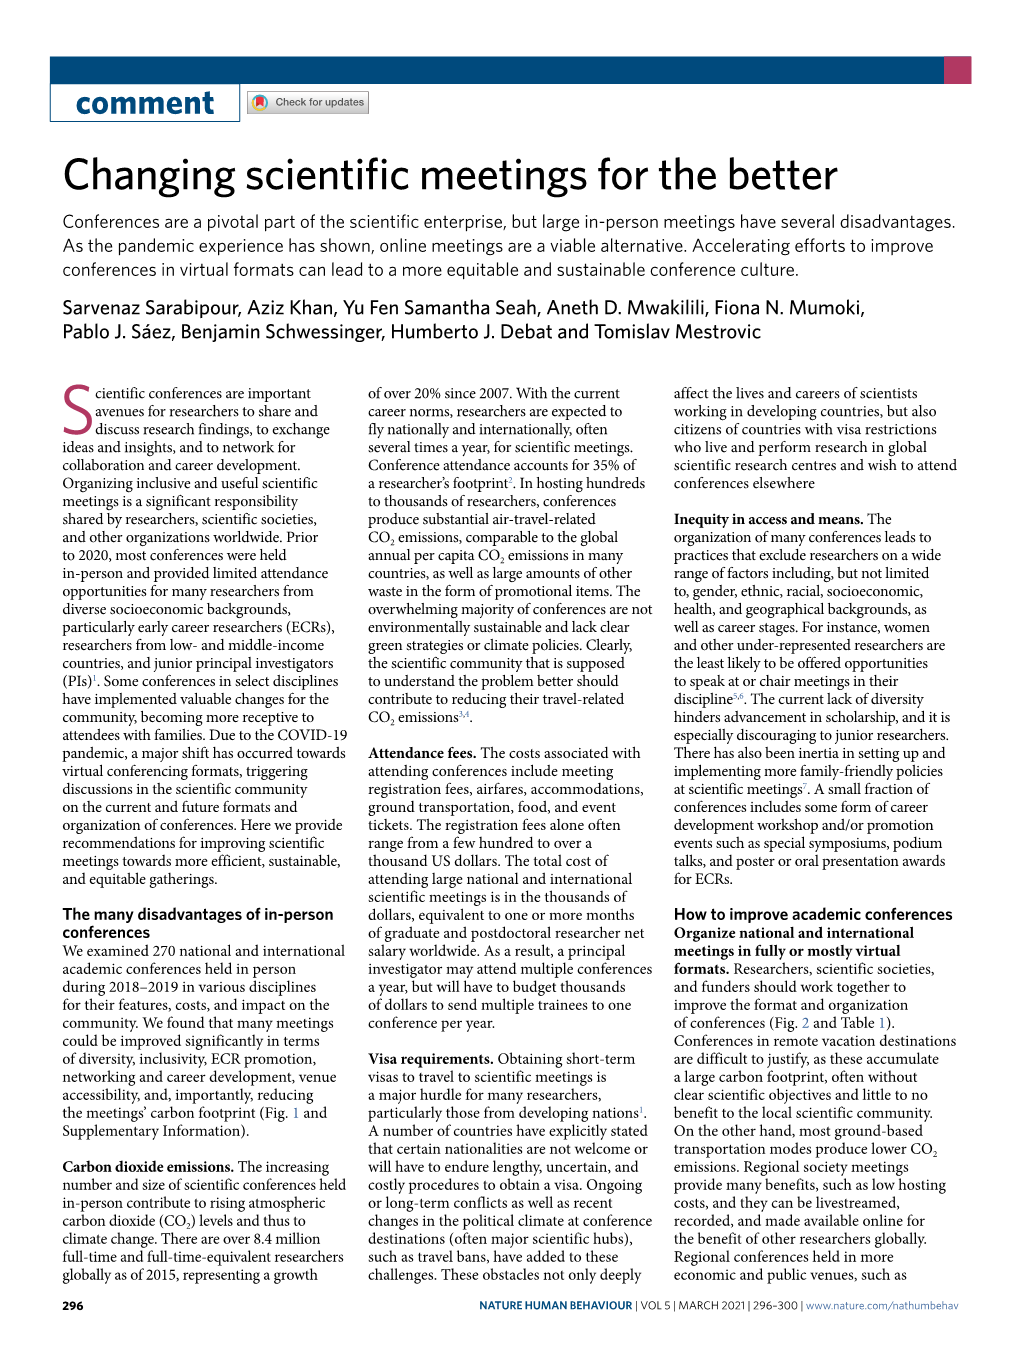 Changing Scientific Meetings for the Better